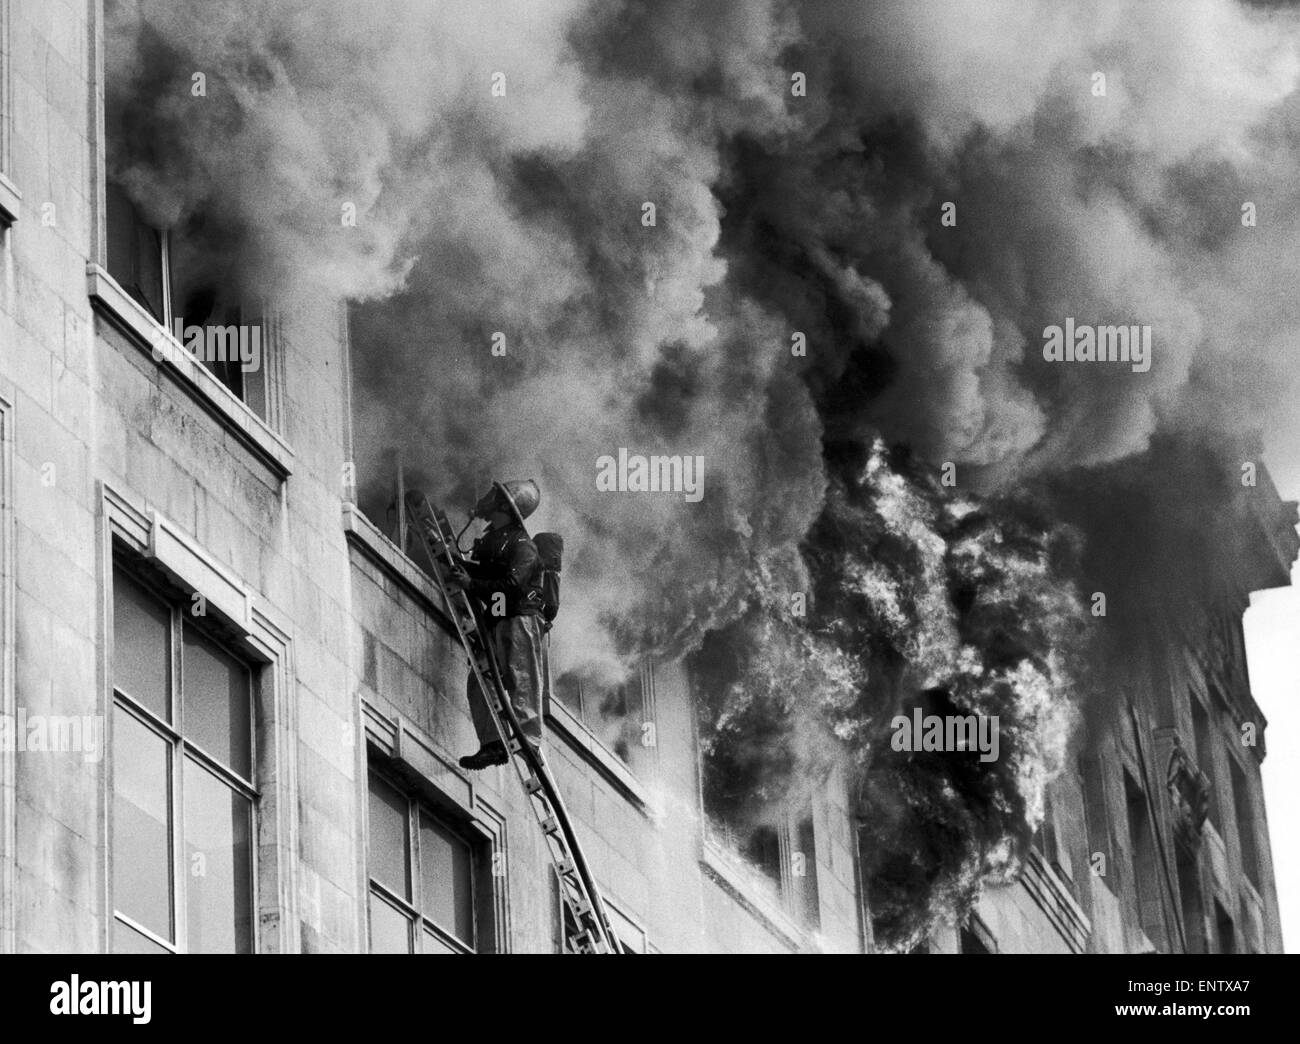 Fire at Woolworths departent store in central Manchester, Tuesday 8th May 1979. The store was the largest Woolworths in Europe, with six floors plus two basement levels. The fire, which started in the second floor furnishing department, killed nine shoppers and one member of staff. It is believed that the fire was started by a damaged electrical cable, which had furniture stacked in front of it. Stock Photo